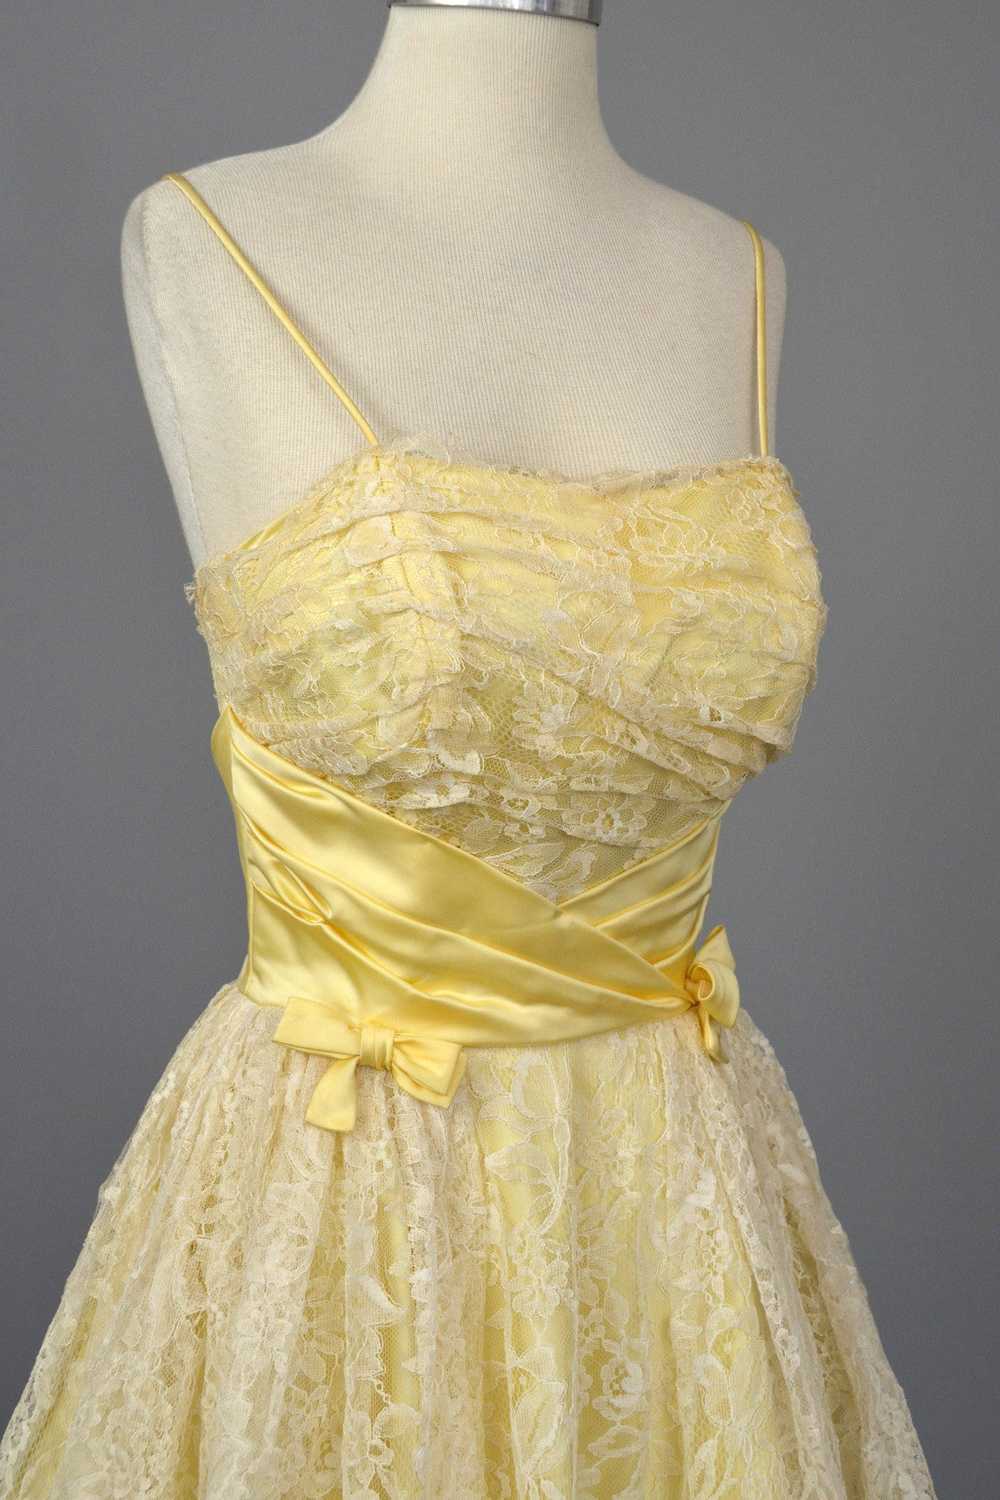 1950s White Lace Buttercup Party Prom Dress - image 2